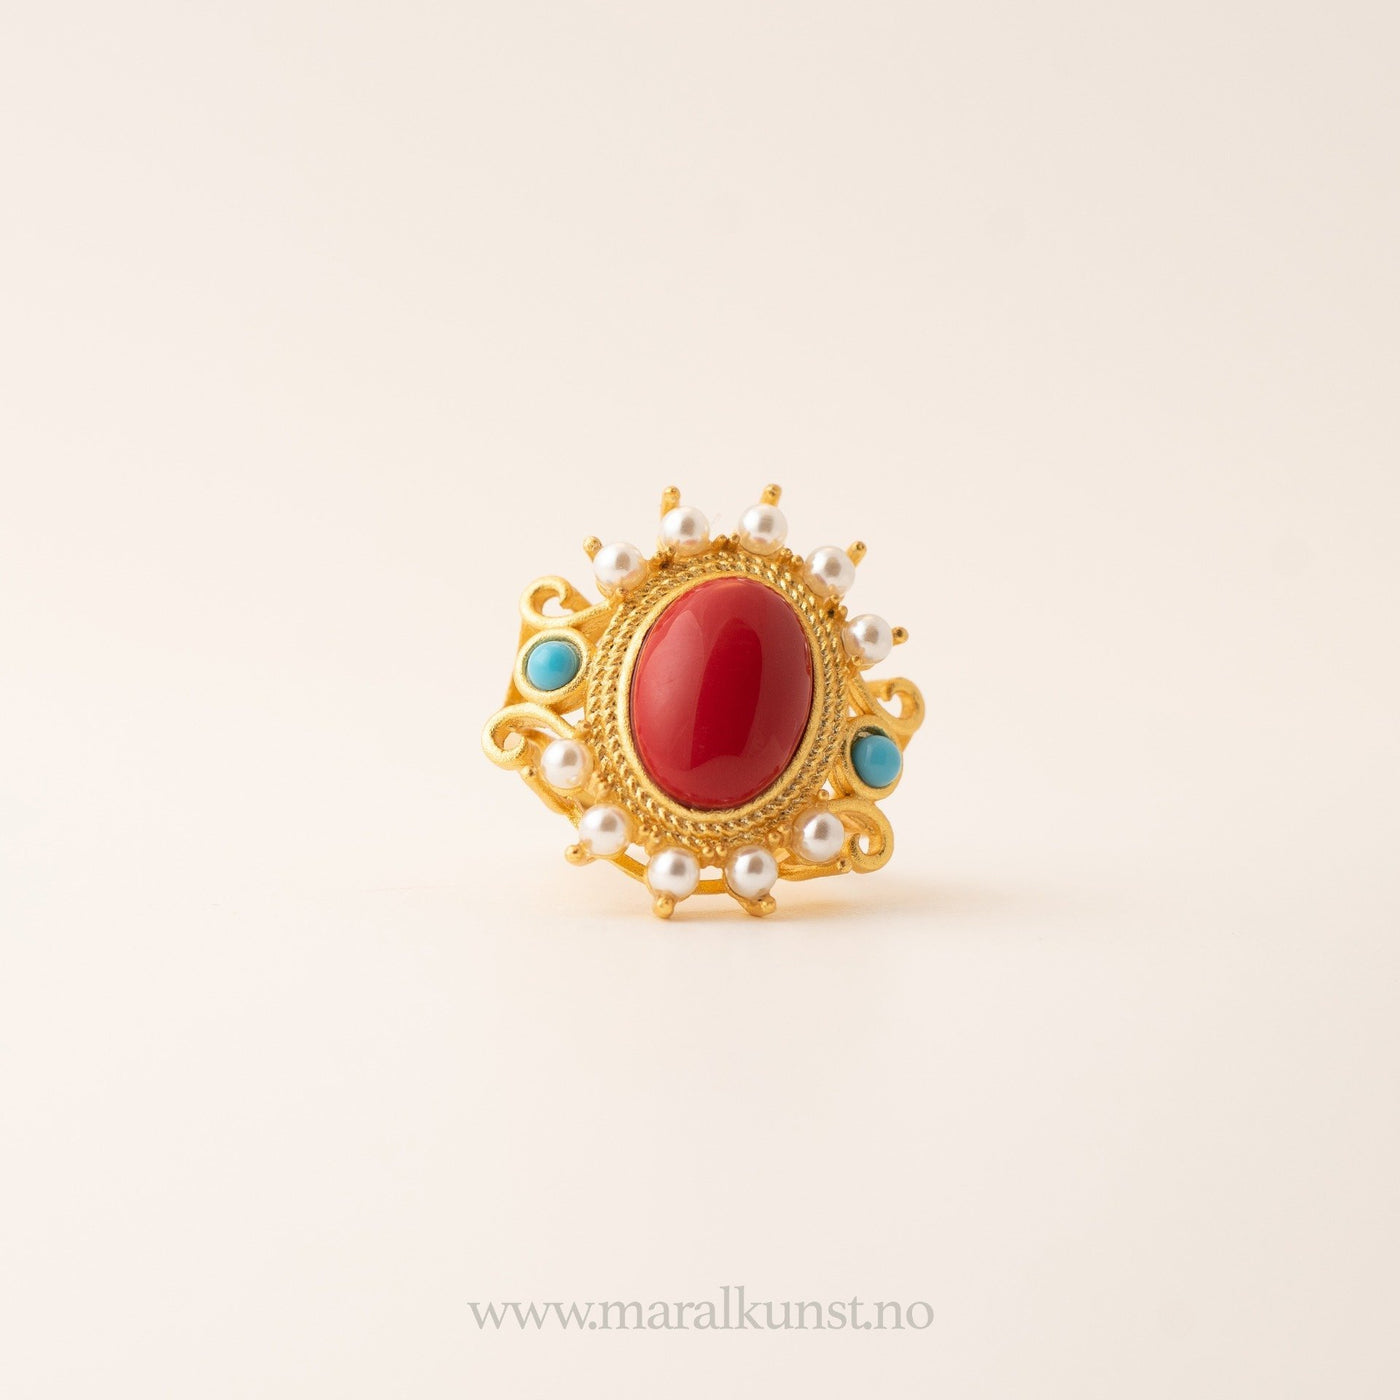 Red Agate, Turquoise And Pearl Silver Ring - Maral Kunst Jewelry